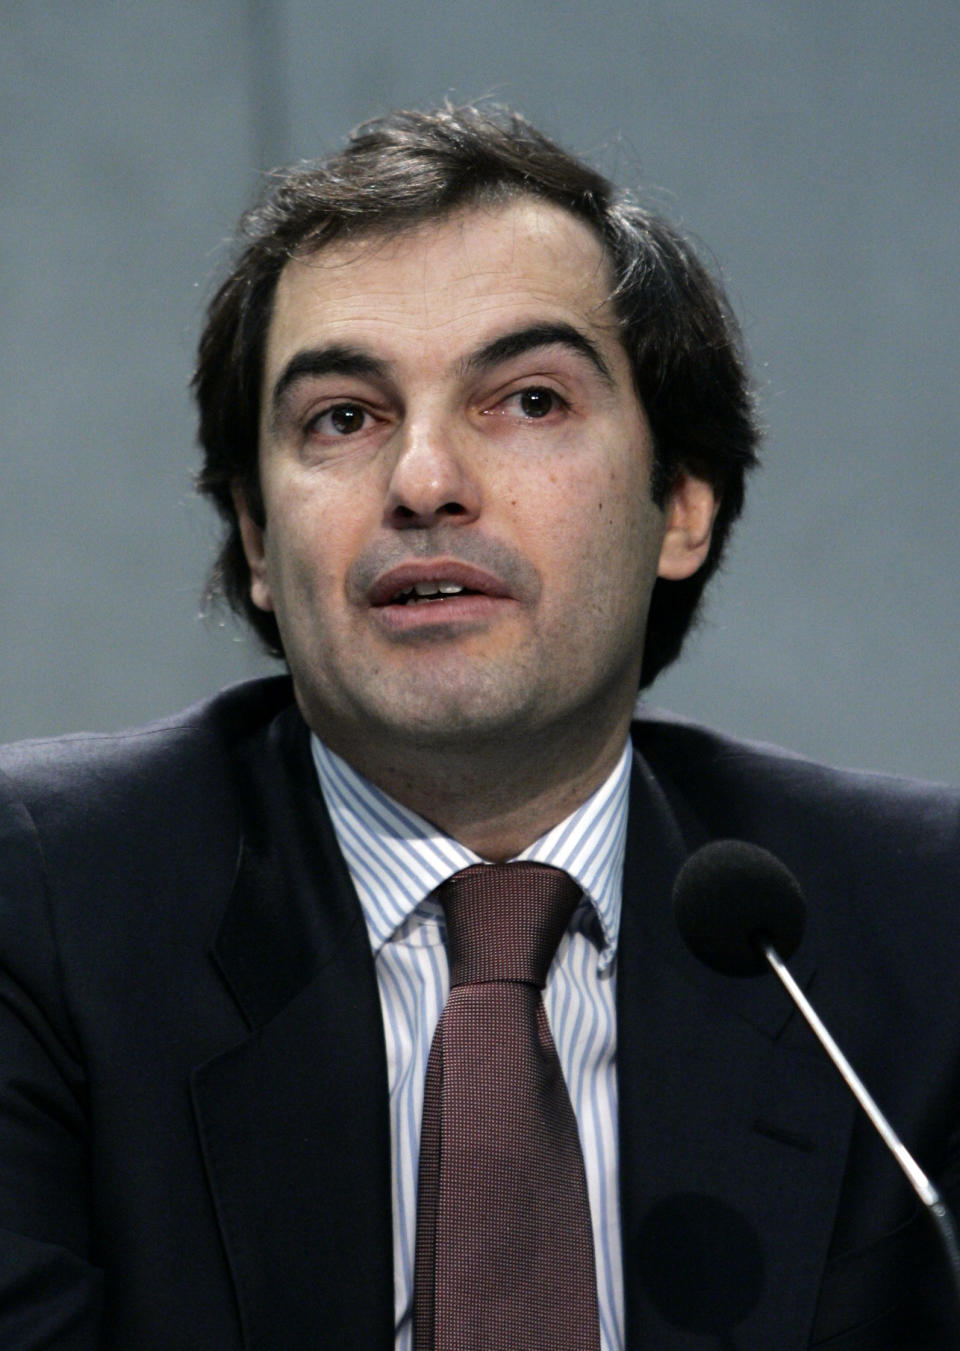 FILE - In this Jan. 23, 2009 file photo, Henrique de Castro, Google's then Managing Director Media Solutions, speaks during a news conference at the Vatican's press room. Yahoo on Wednesday, Jan. 15, 2014 announced that CEO Marissa Mayer is cutting loose de Castro, Yahoo's chief operating officer, a possible sign that the Internet company's efforts to revive its long-slumping advertising sales aren't paying off.(AP Photo/Riccarco De Luca, File)